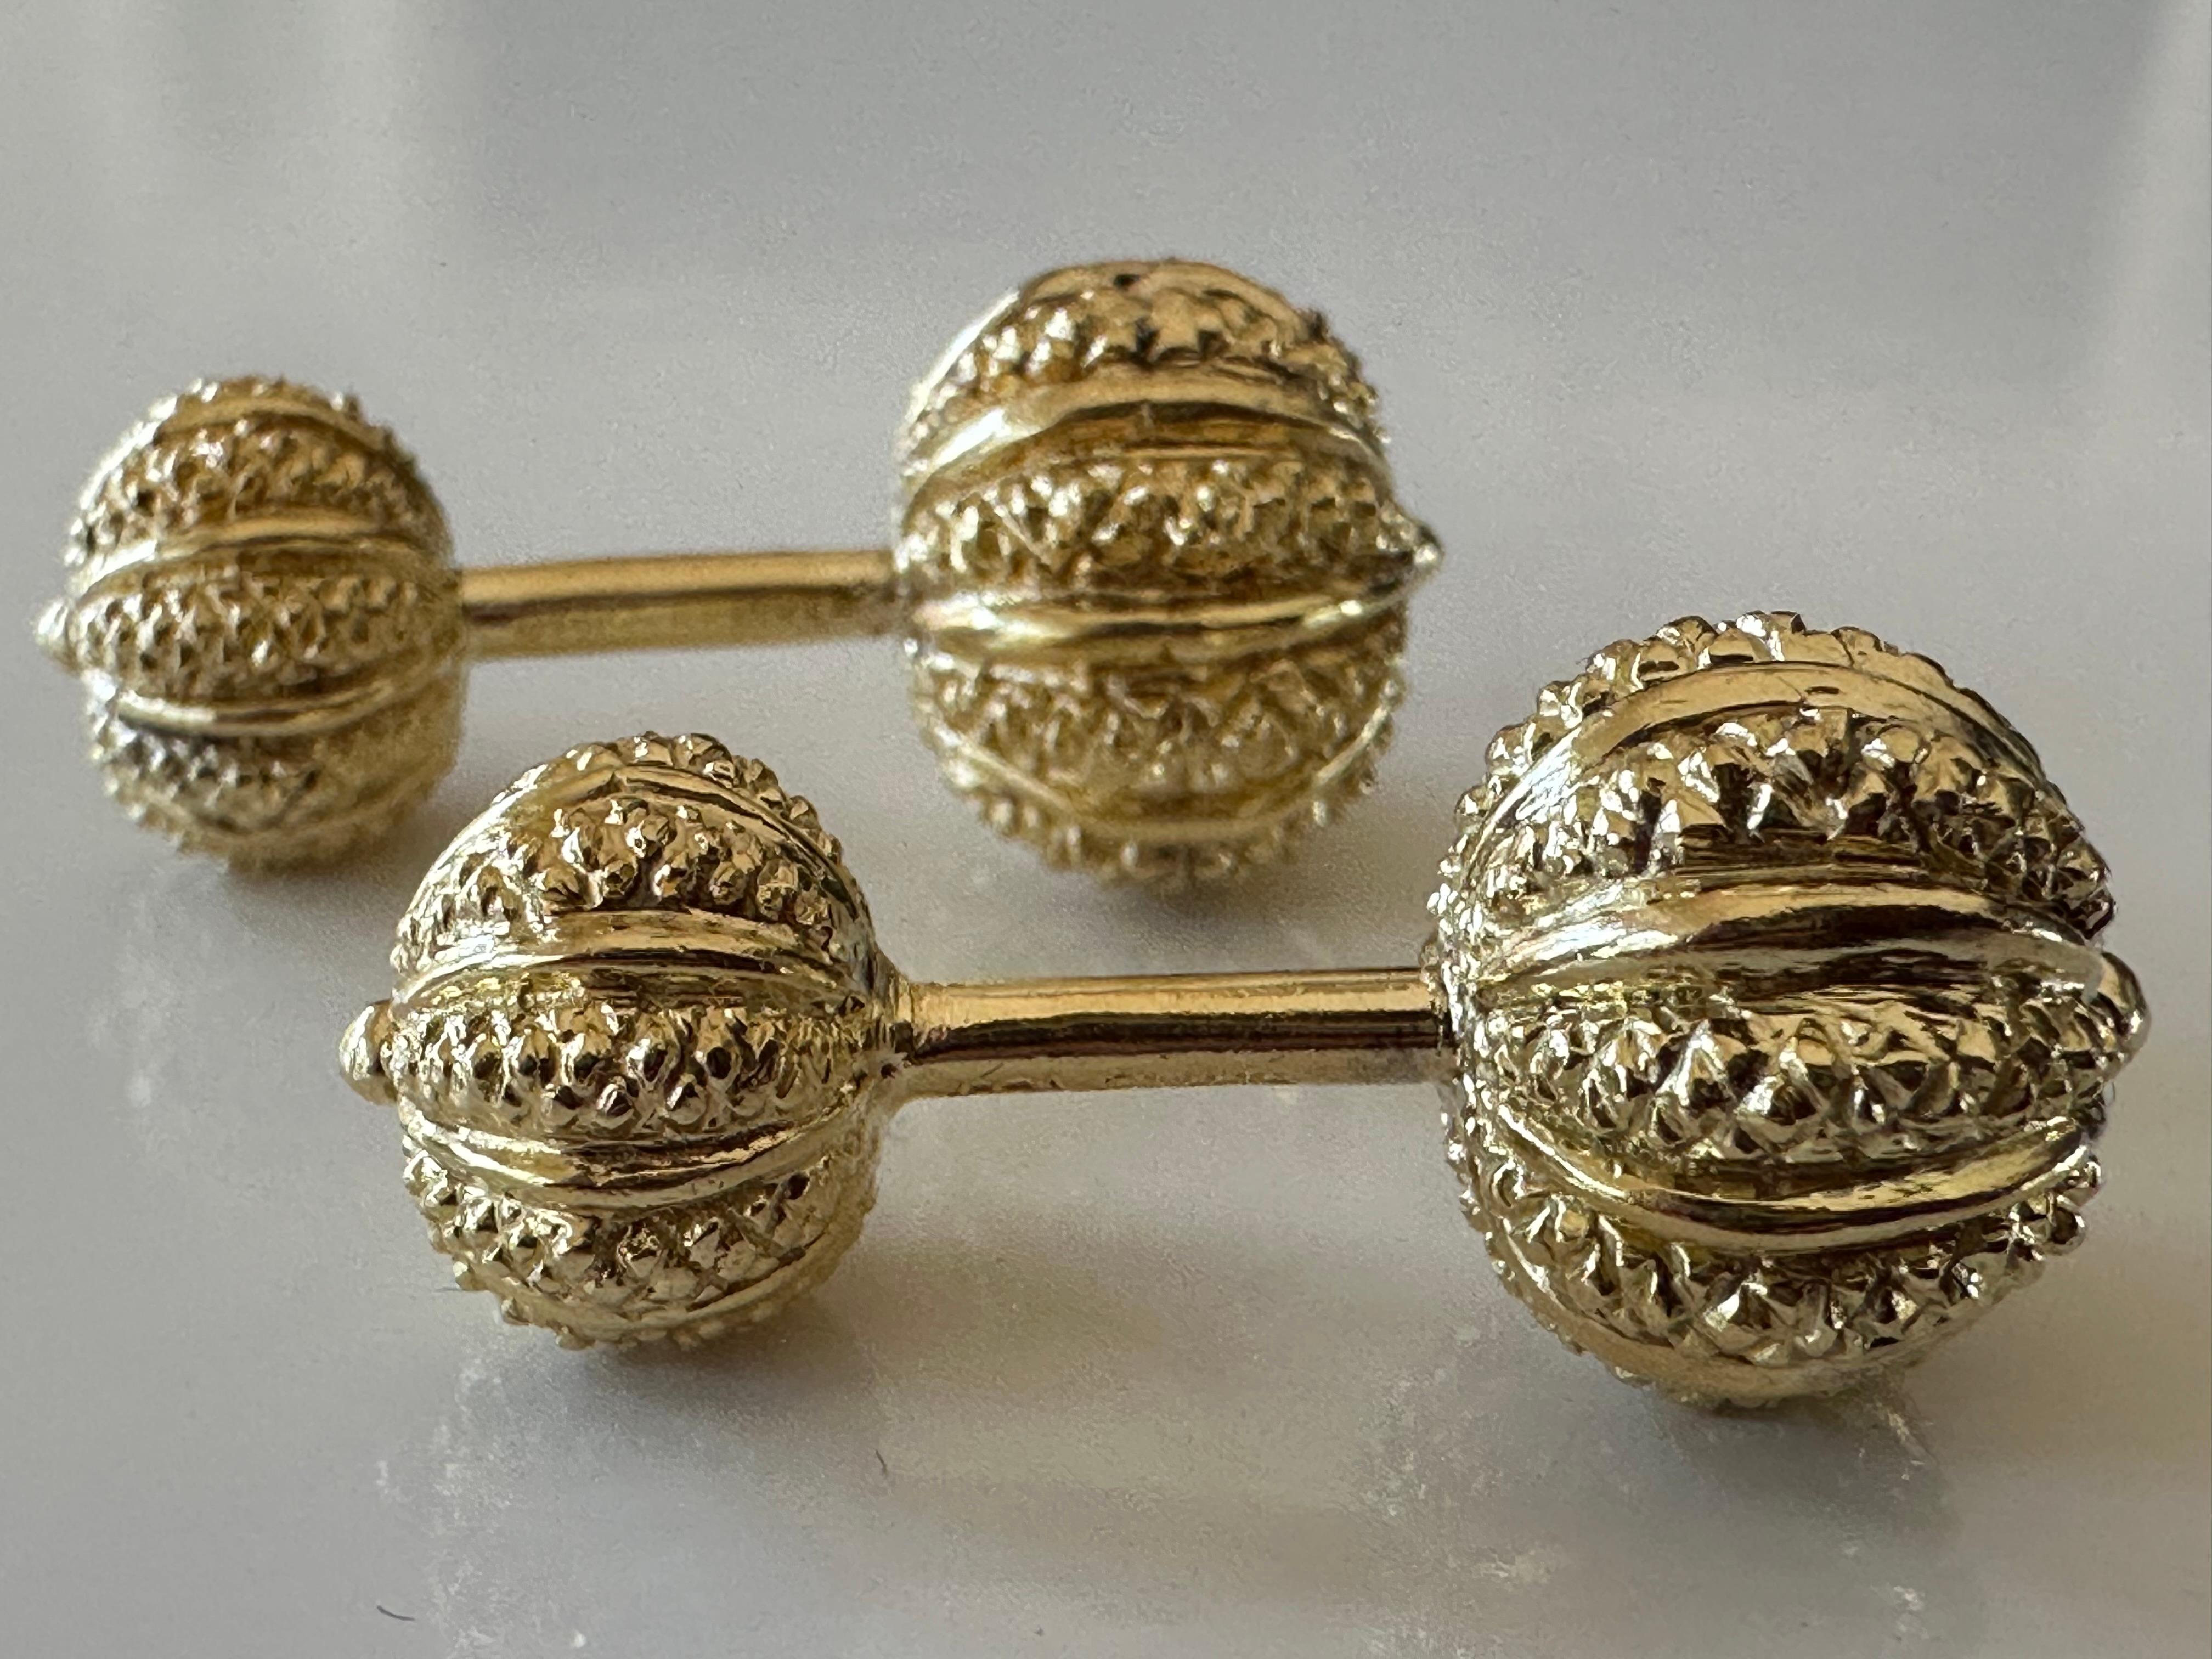 These cufflinks are artfully hand crafted in rich, highly textured 18K yellow gold by legendary designer Jean Schlumberger for Tiffany & Co. They measure 1.25 inches long, 12mm (top ball), 10mm (bottom ball) and are stamped Schlumberger, Tiffany,